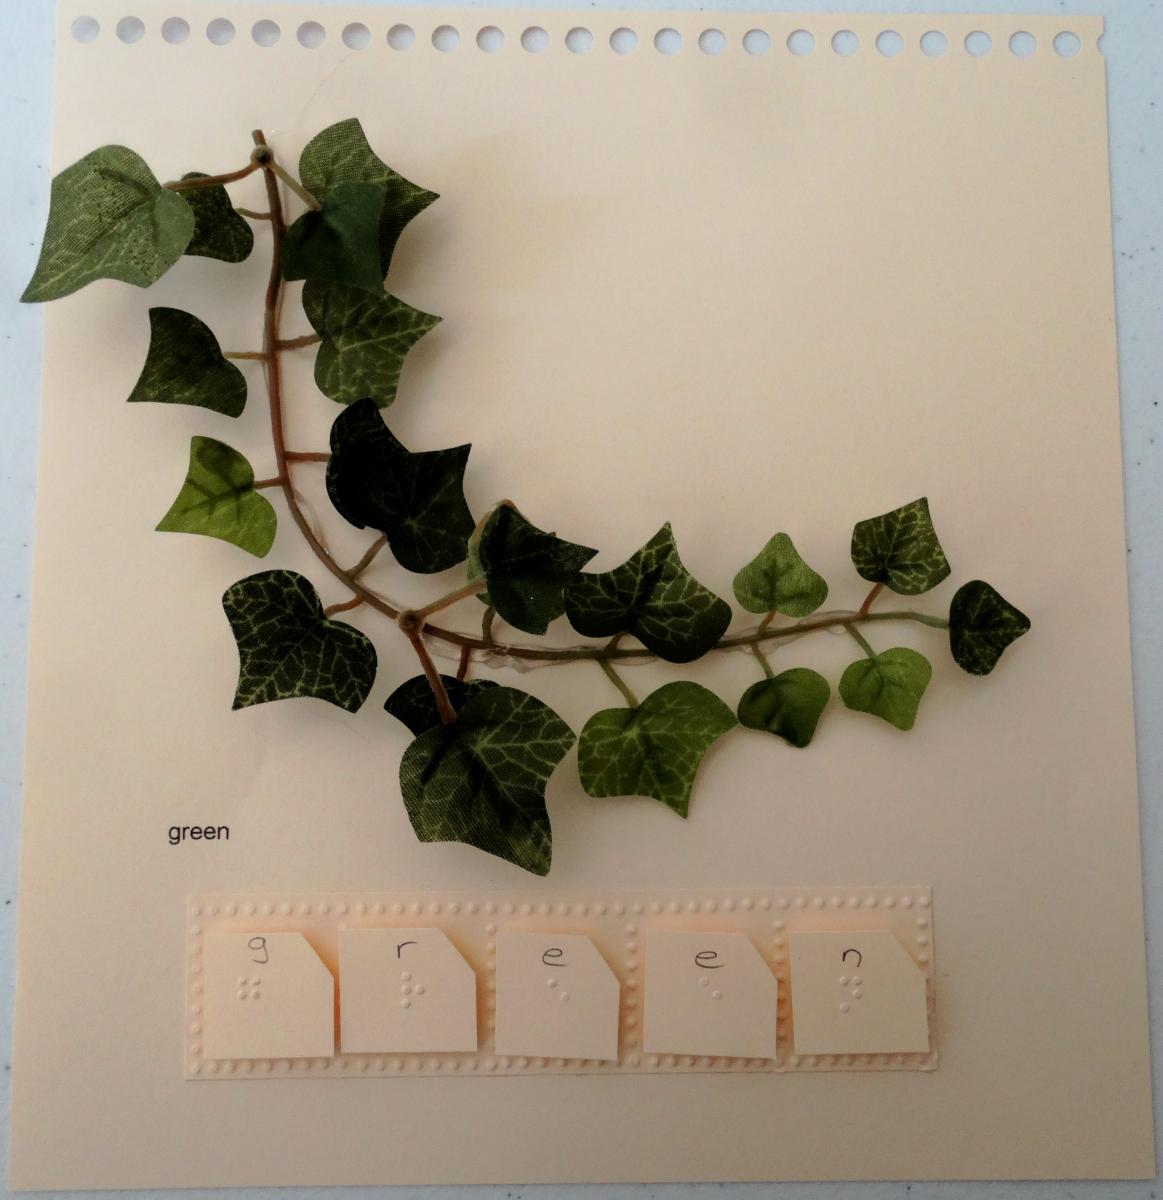 green leaves with braille letters spelling out g-r-e-e-n